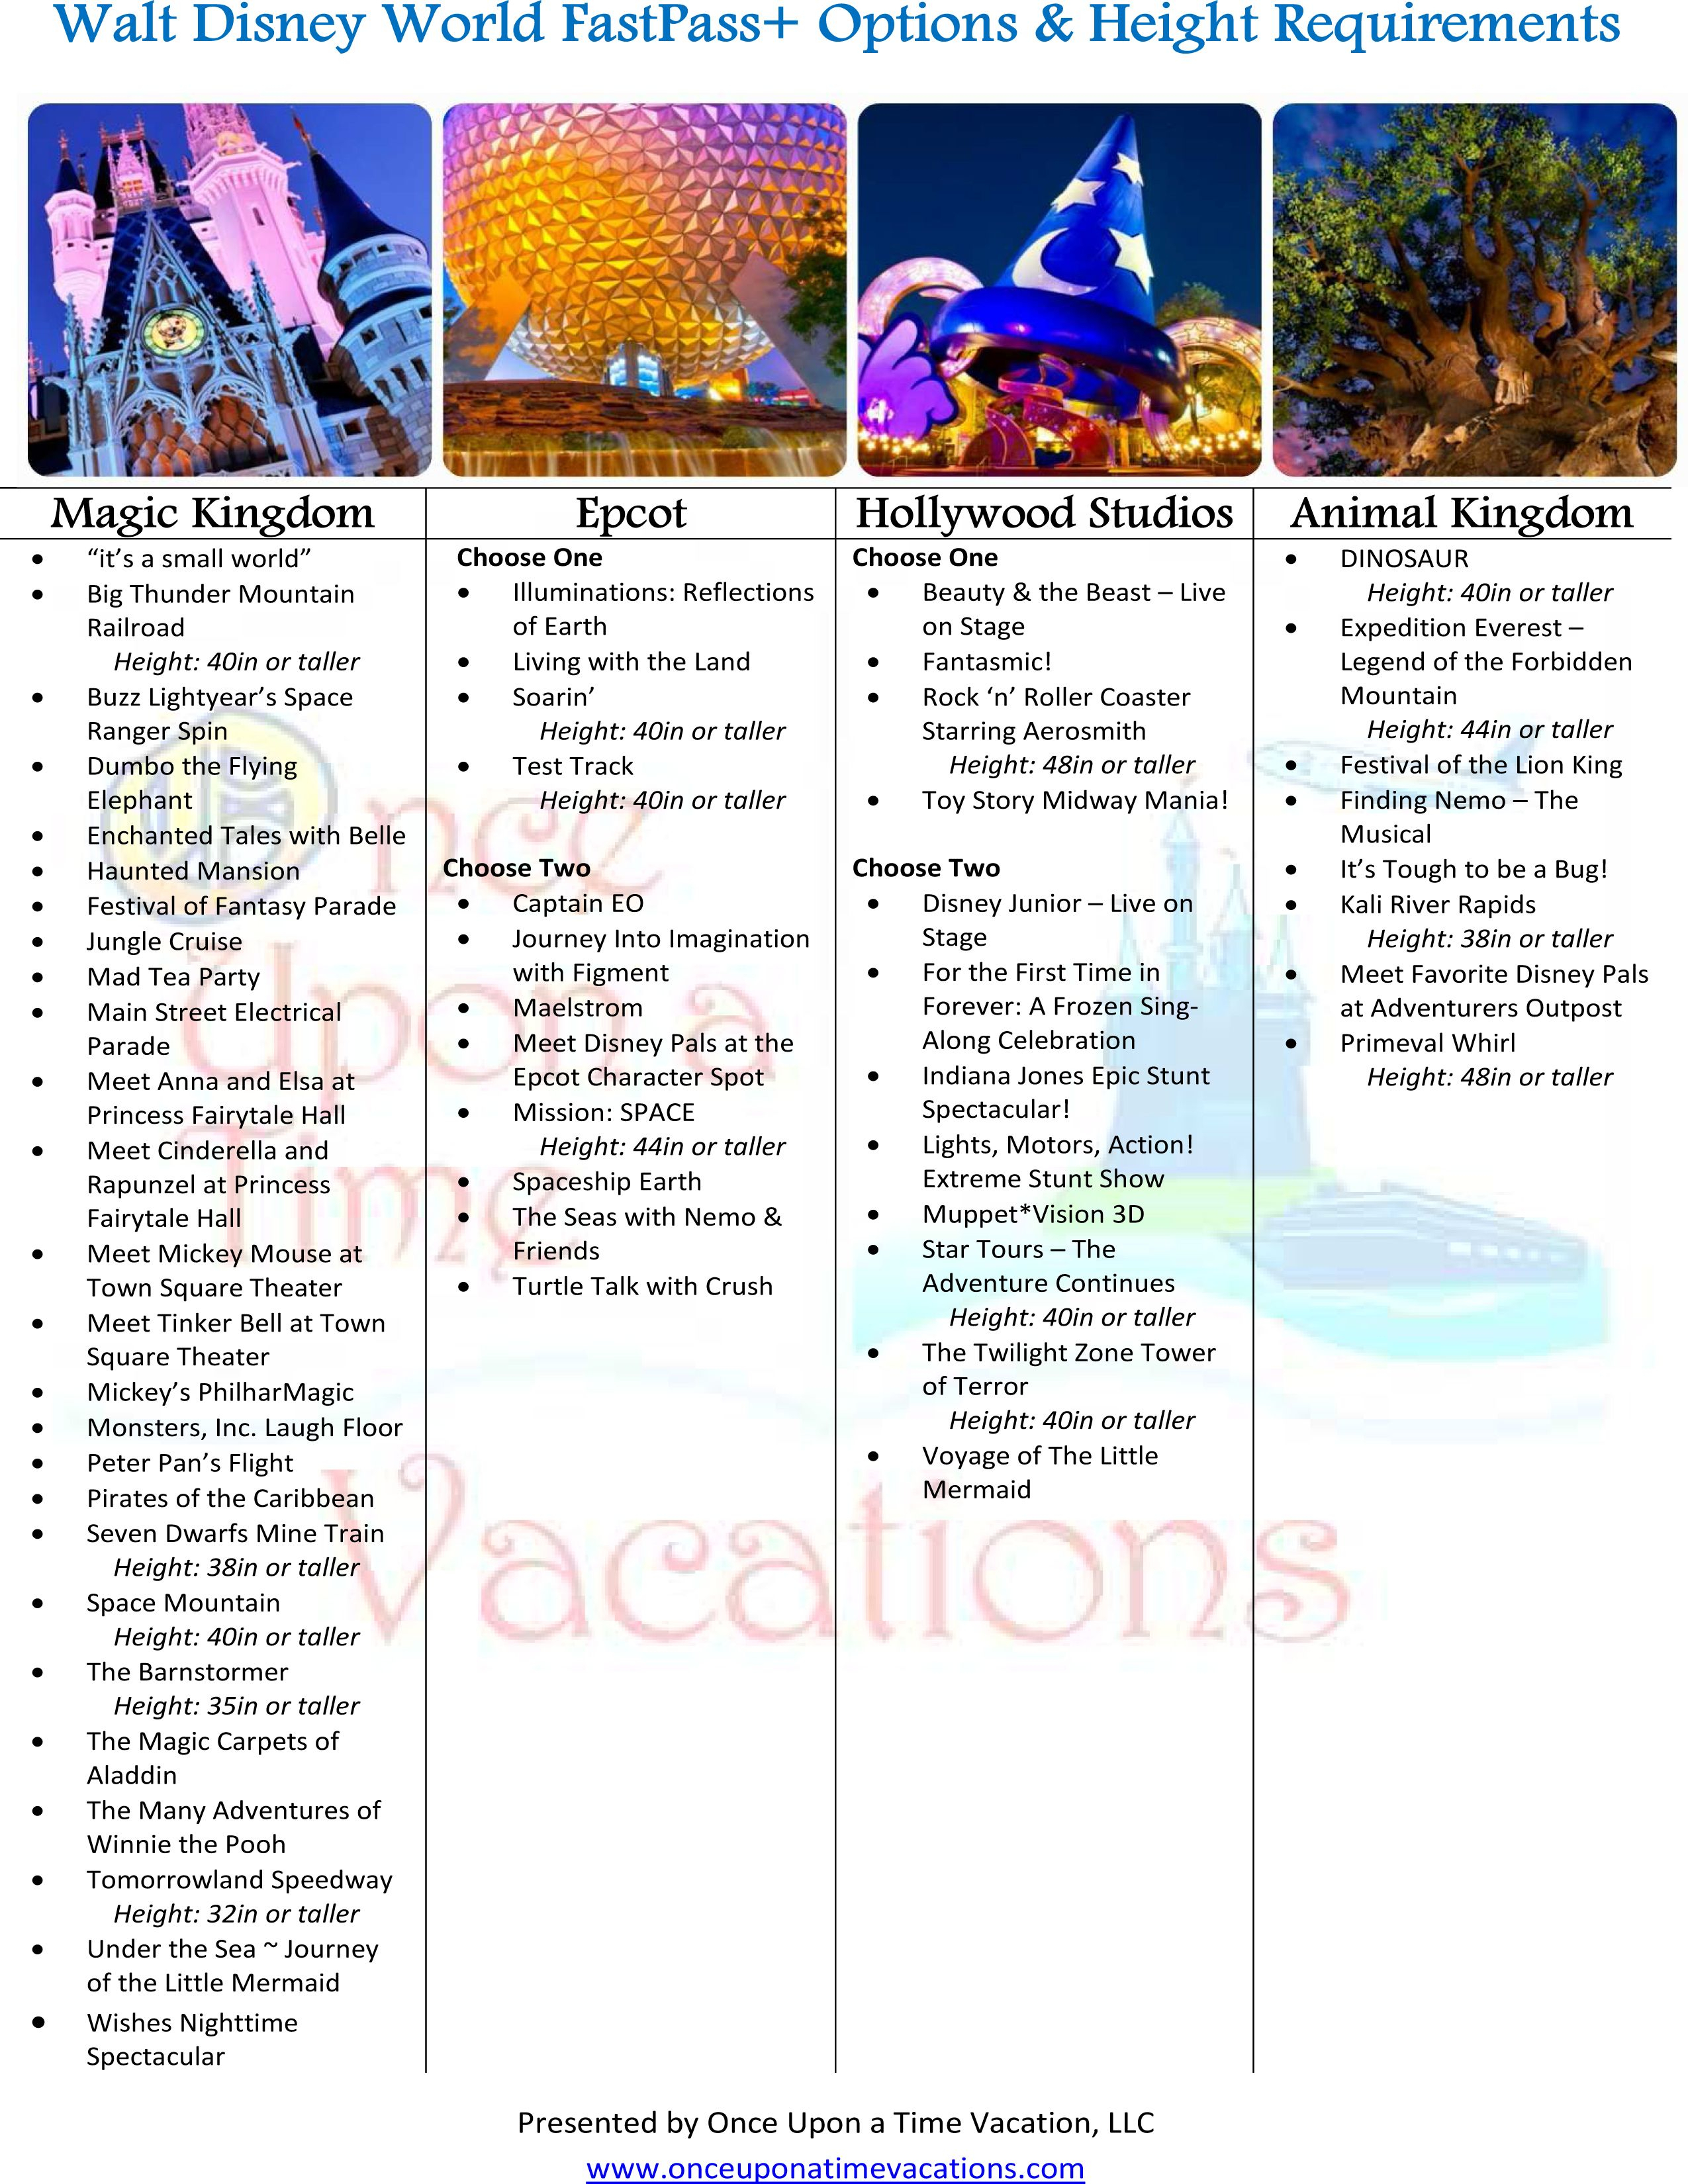 Walt Disney World 101 ~ Fastpass+ Tiers And Recommendations